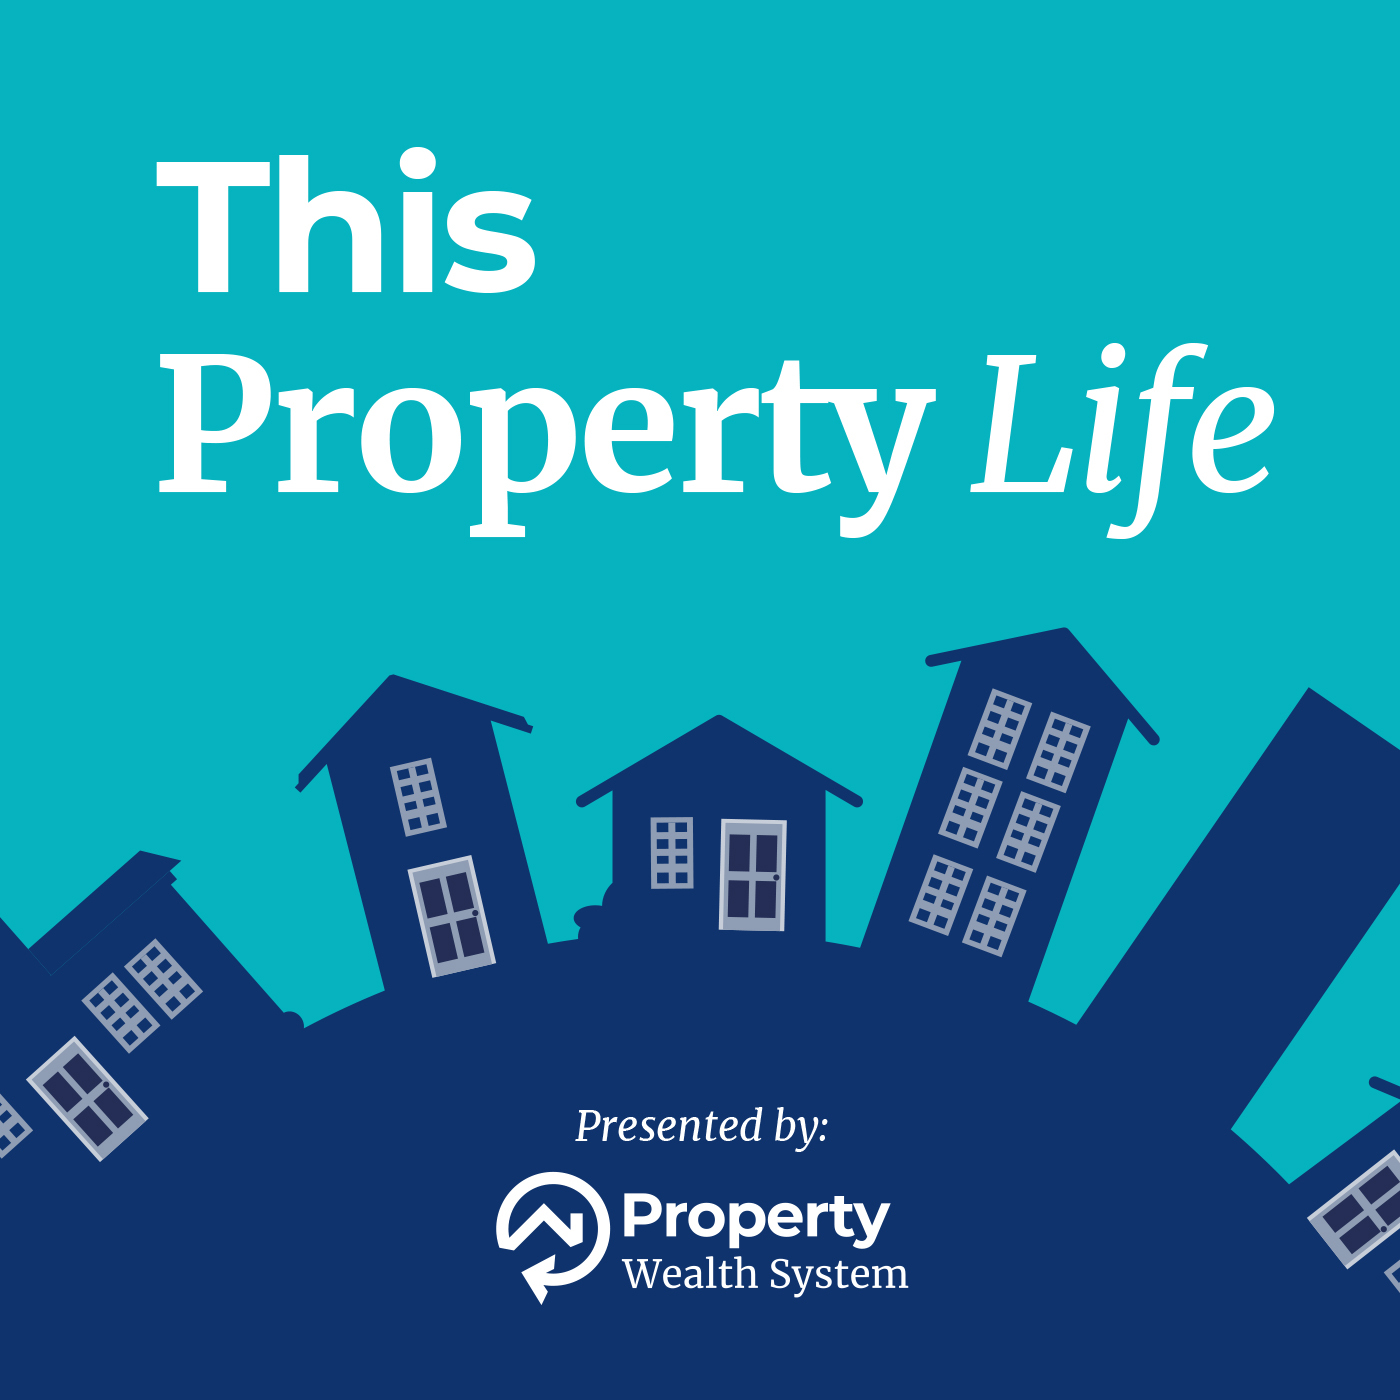 How To Change Your Life Through Property - with Nick Claydon